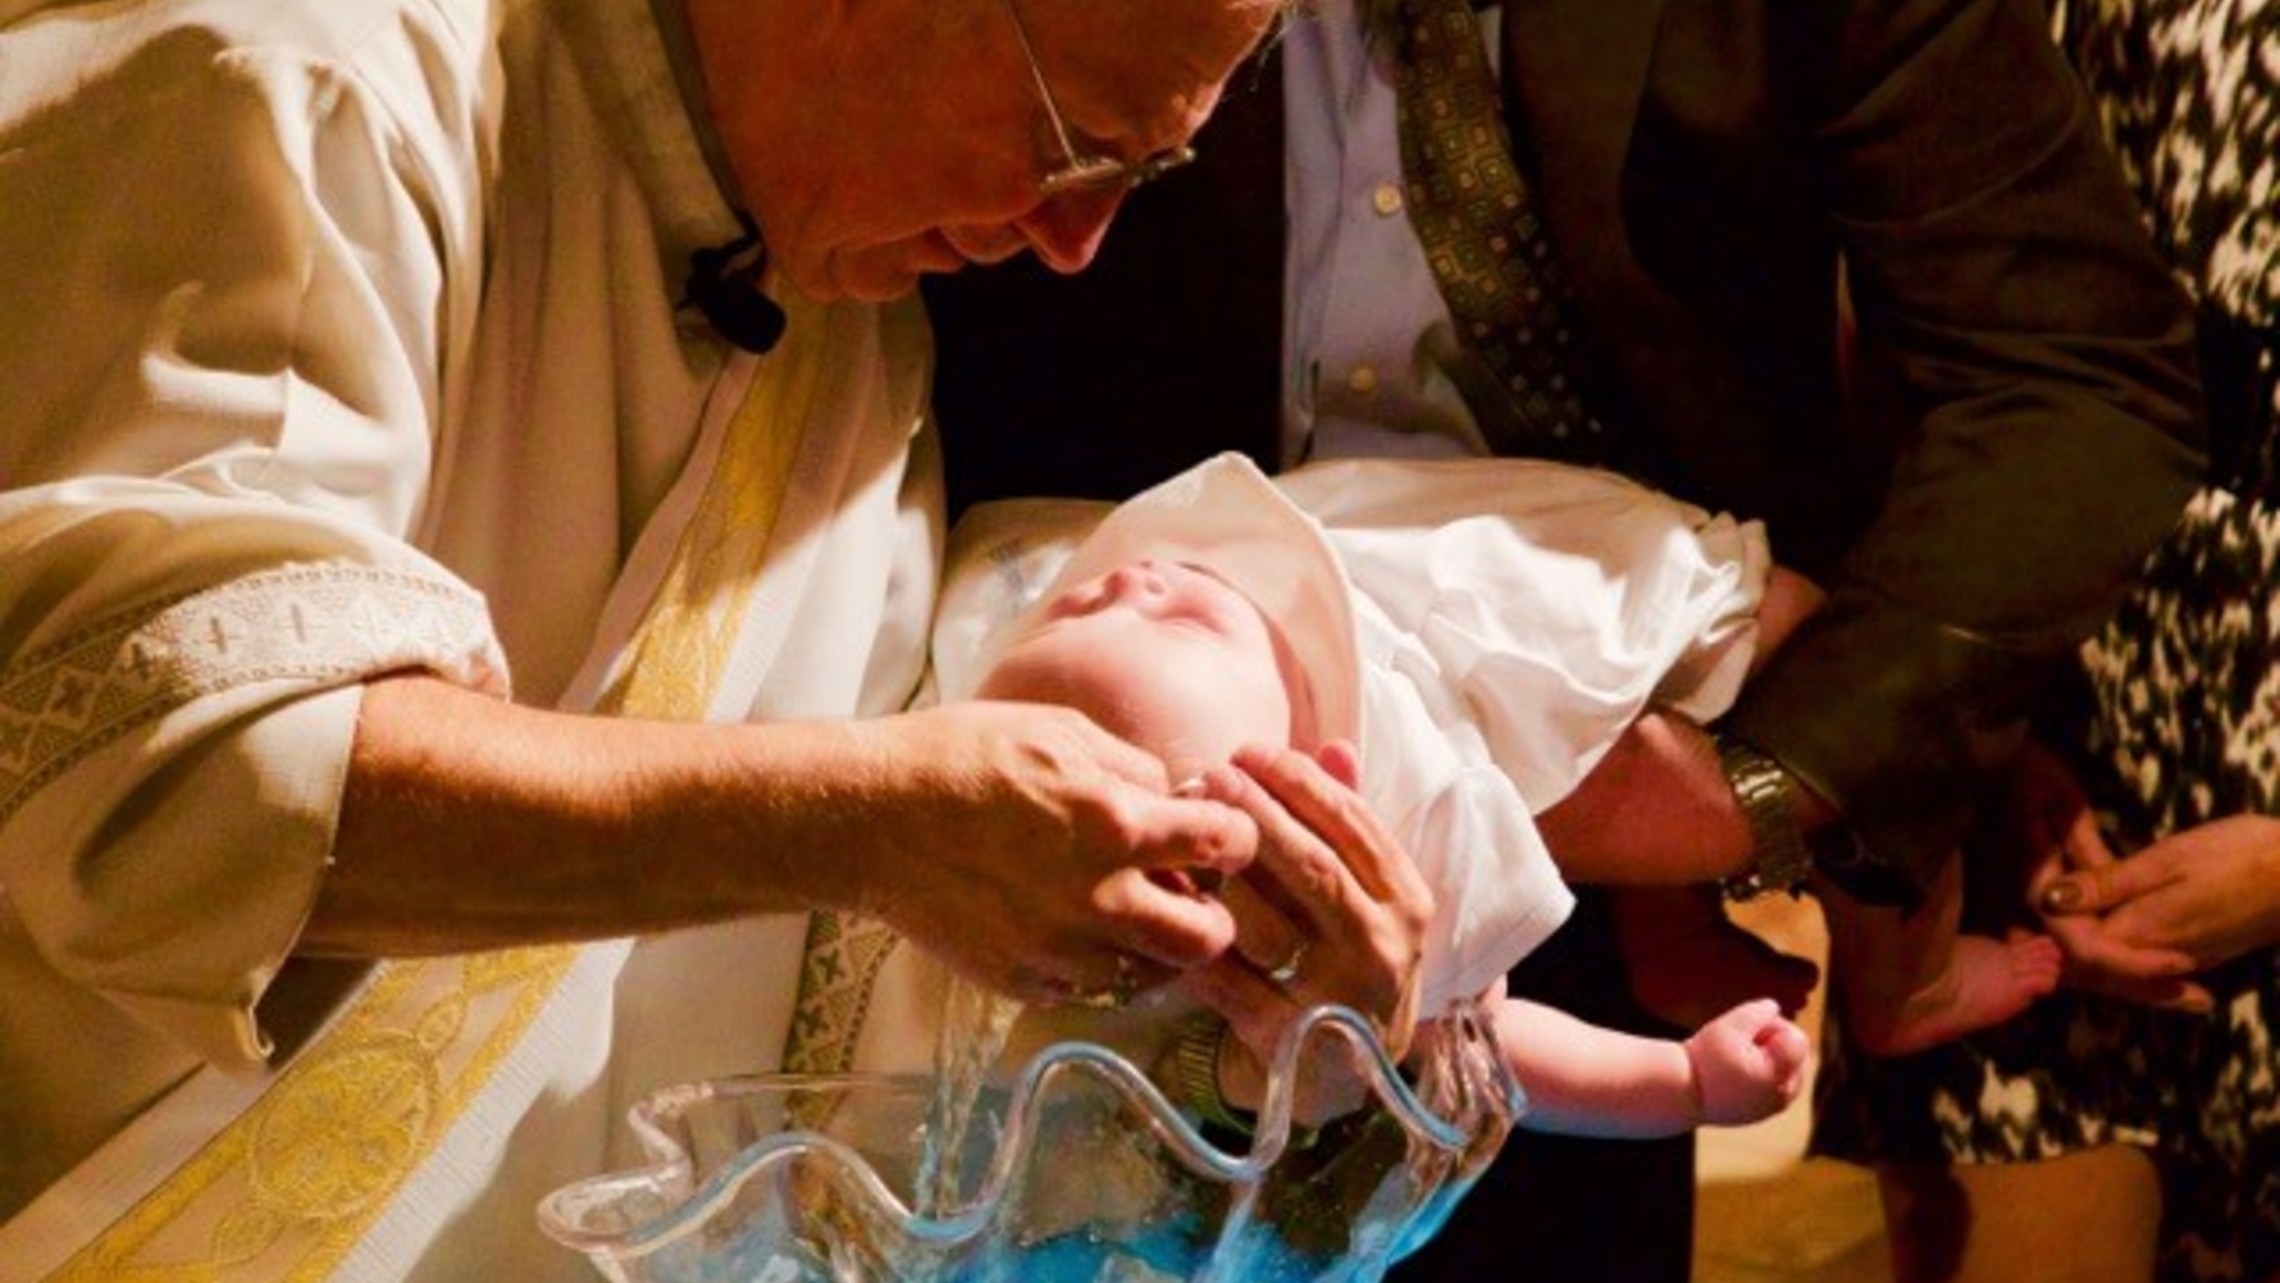 Infant Baptism at St Michael's in Livermore, CA